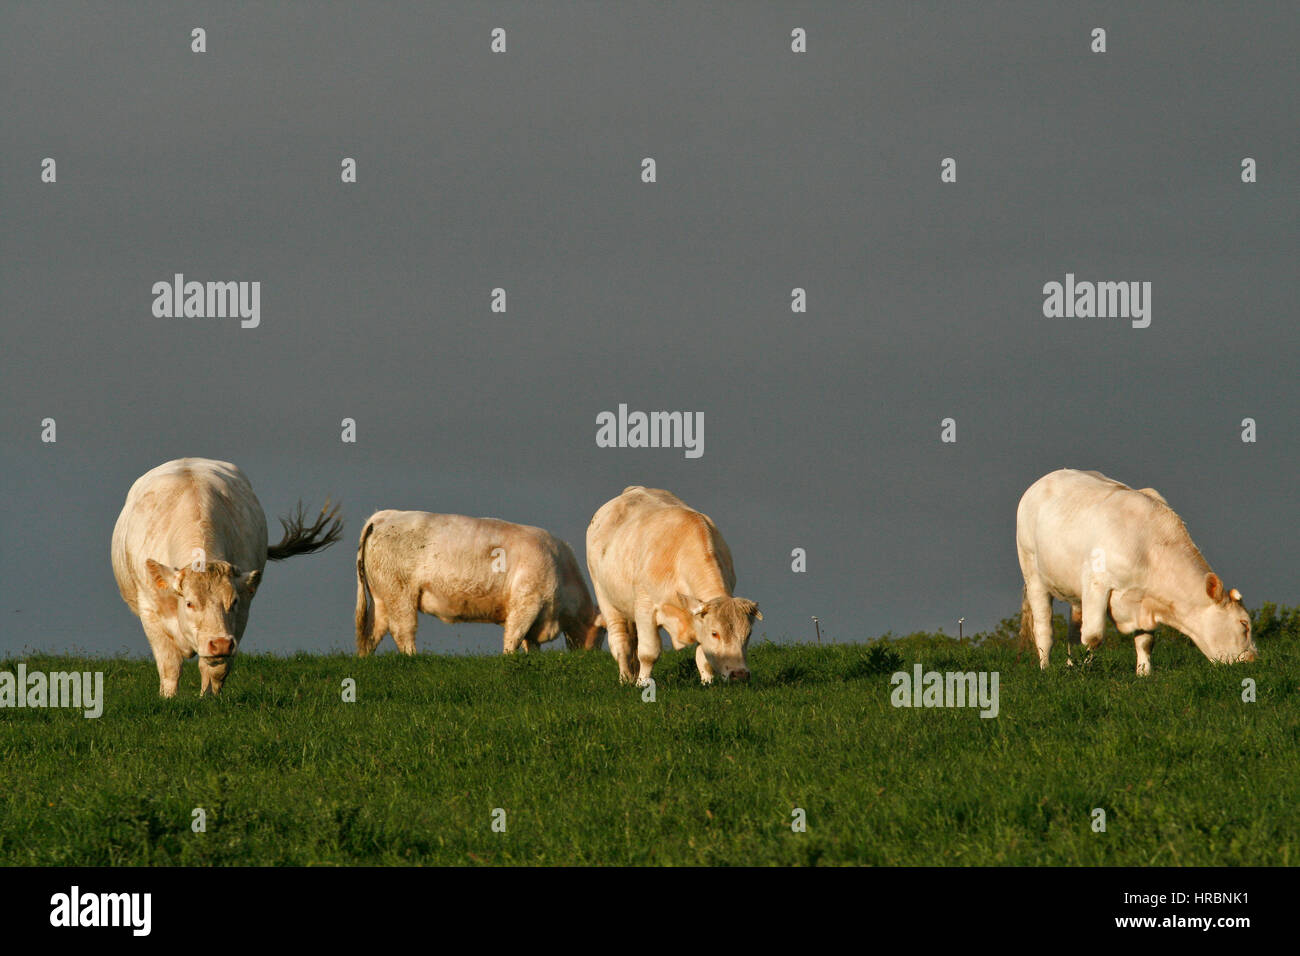 cattle for meat production Stock Photo